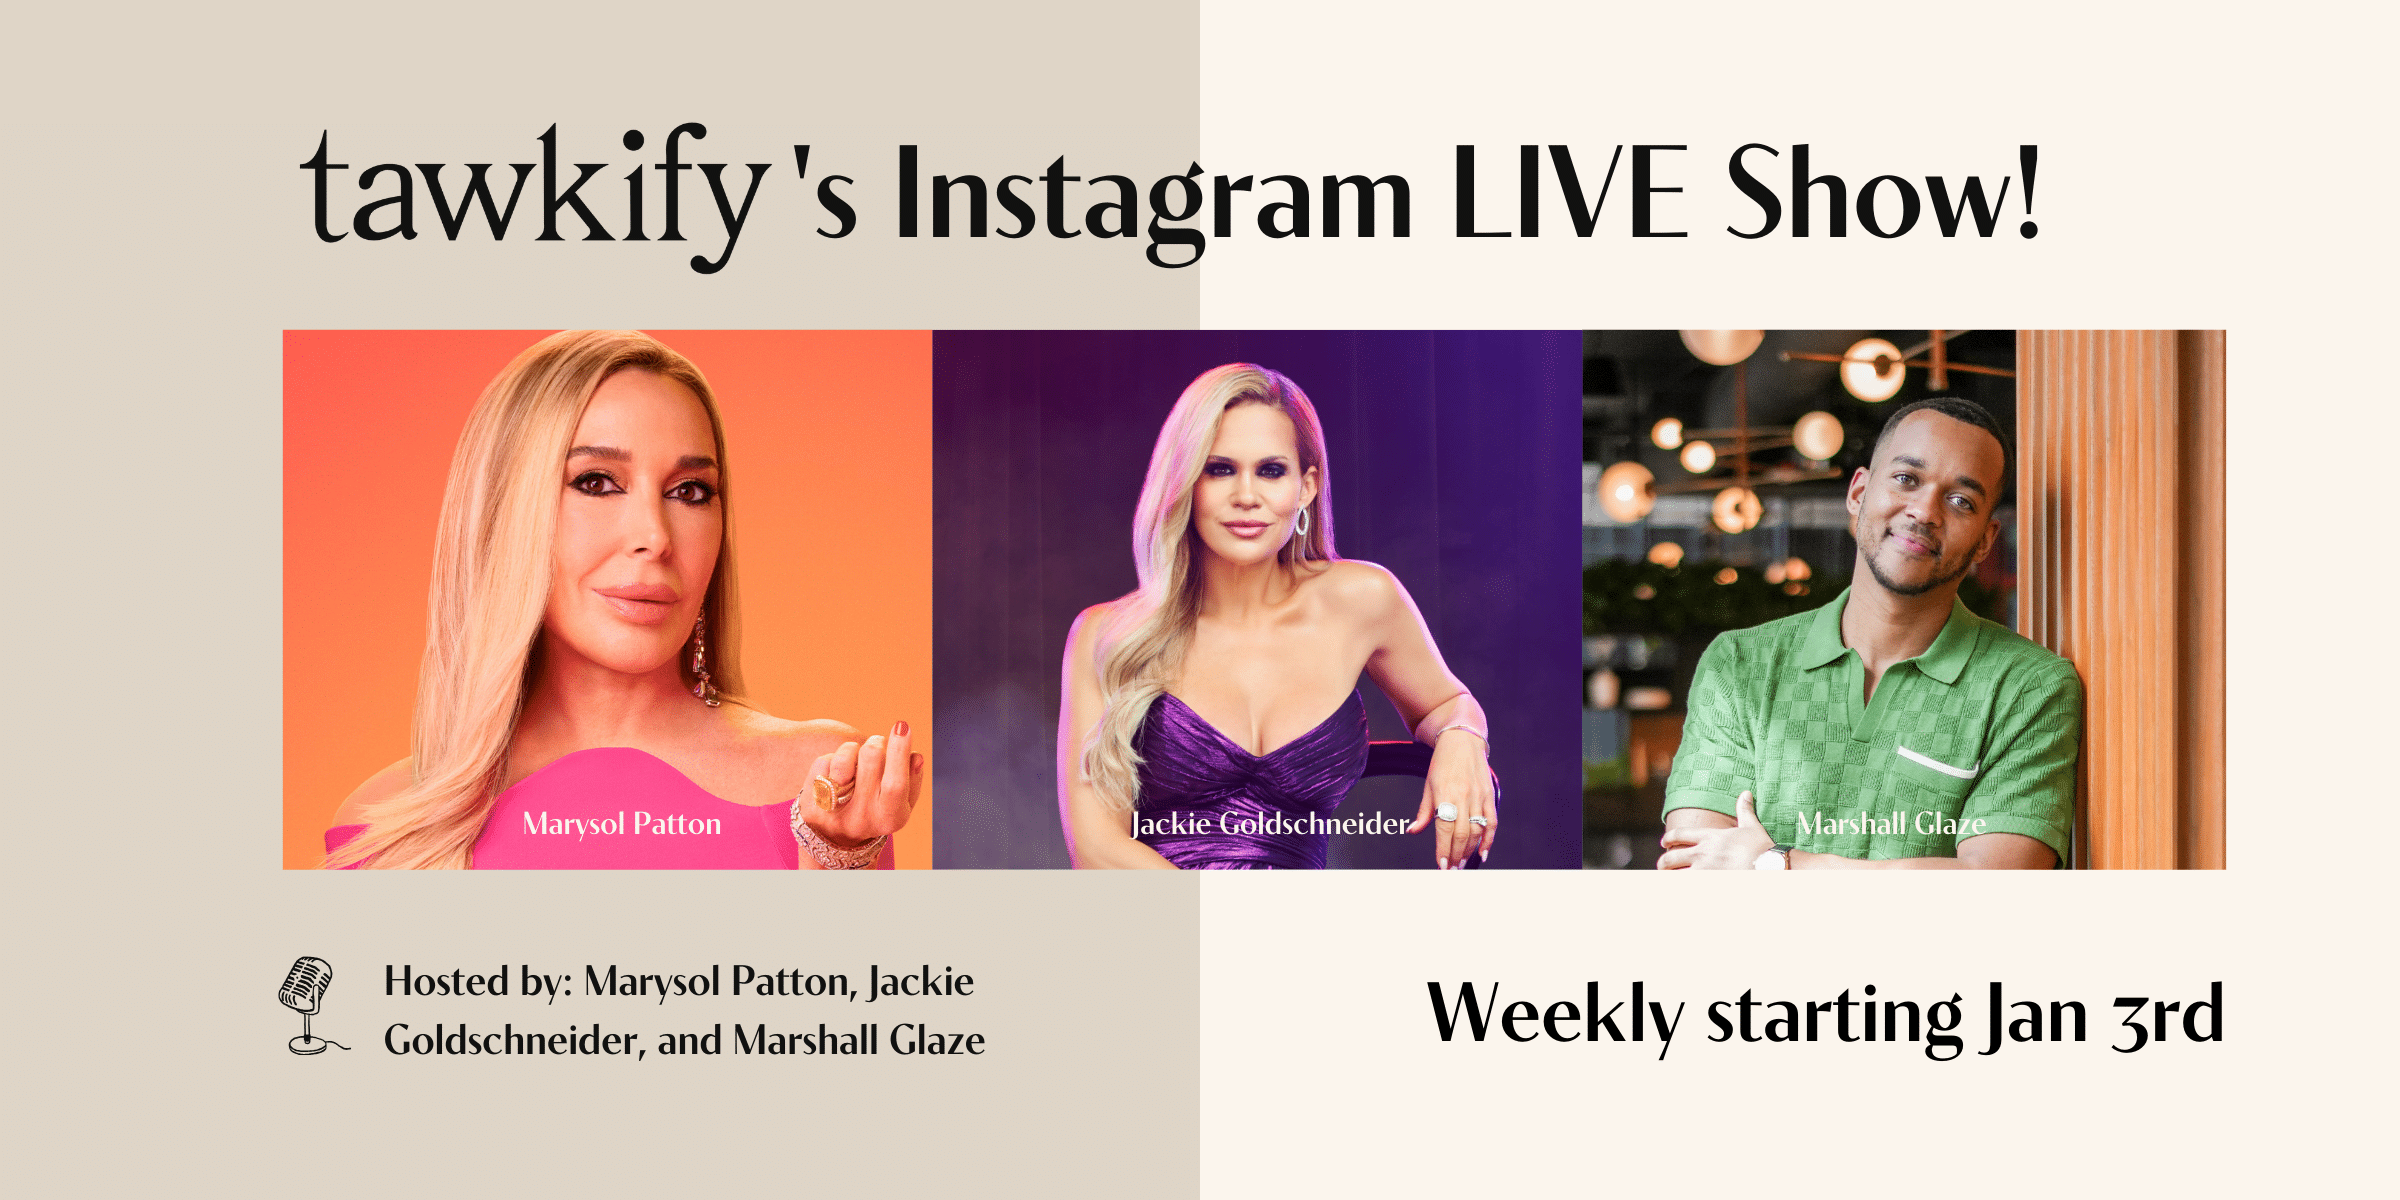 Ready for the dating and relationships show you’ve been waiting for? Learn more about our new Instagram Live show with celebrity hosts.